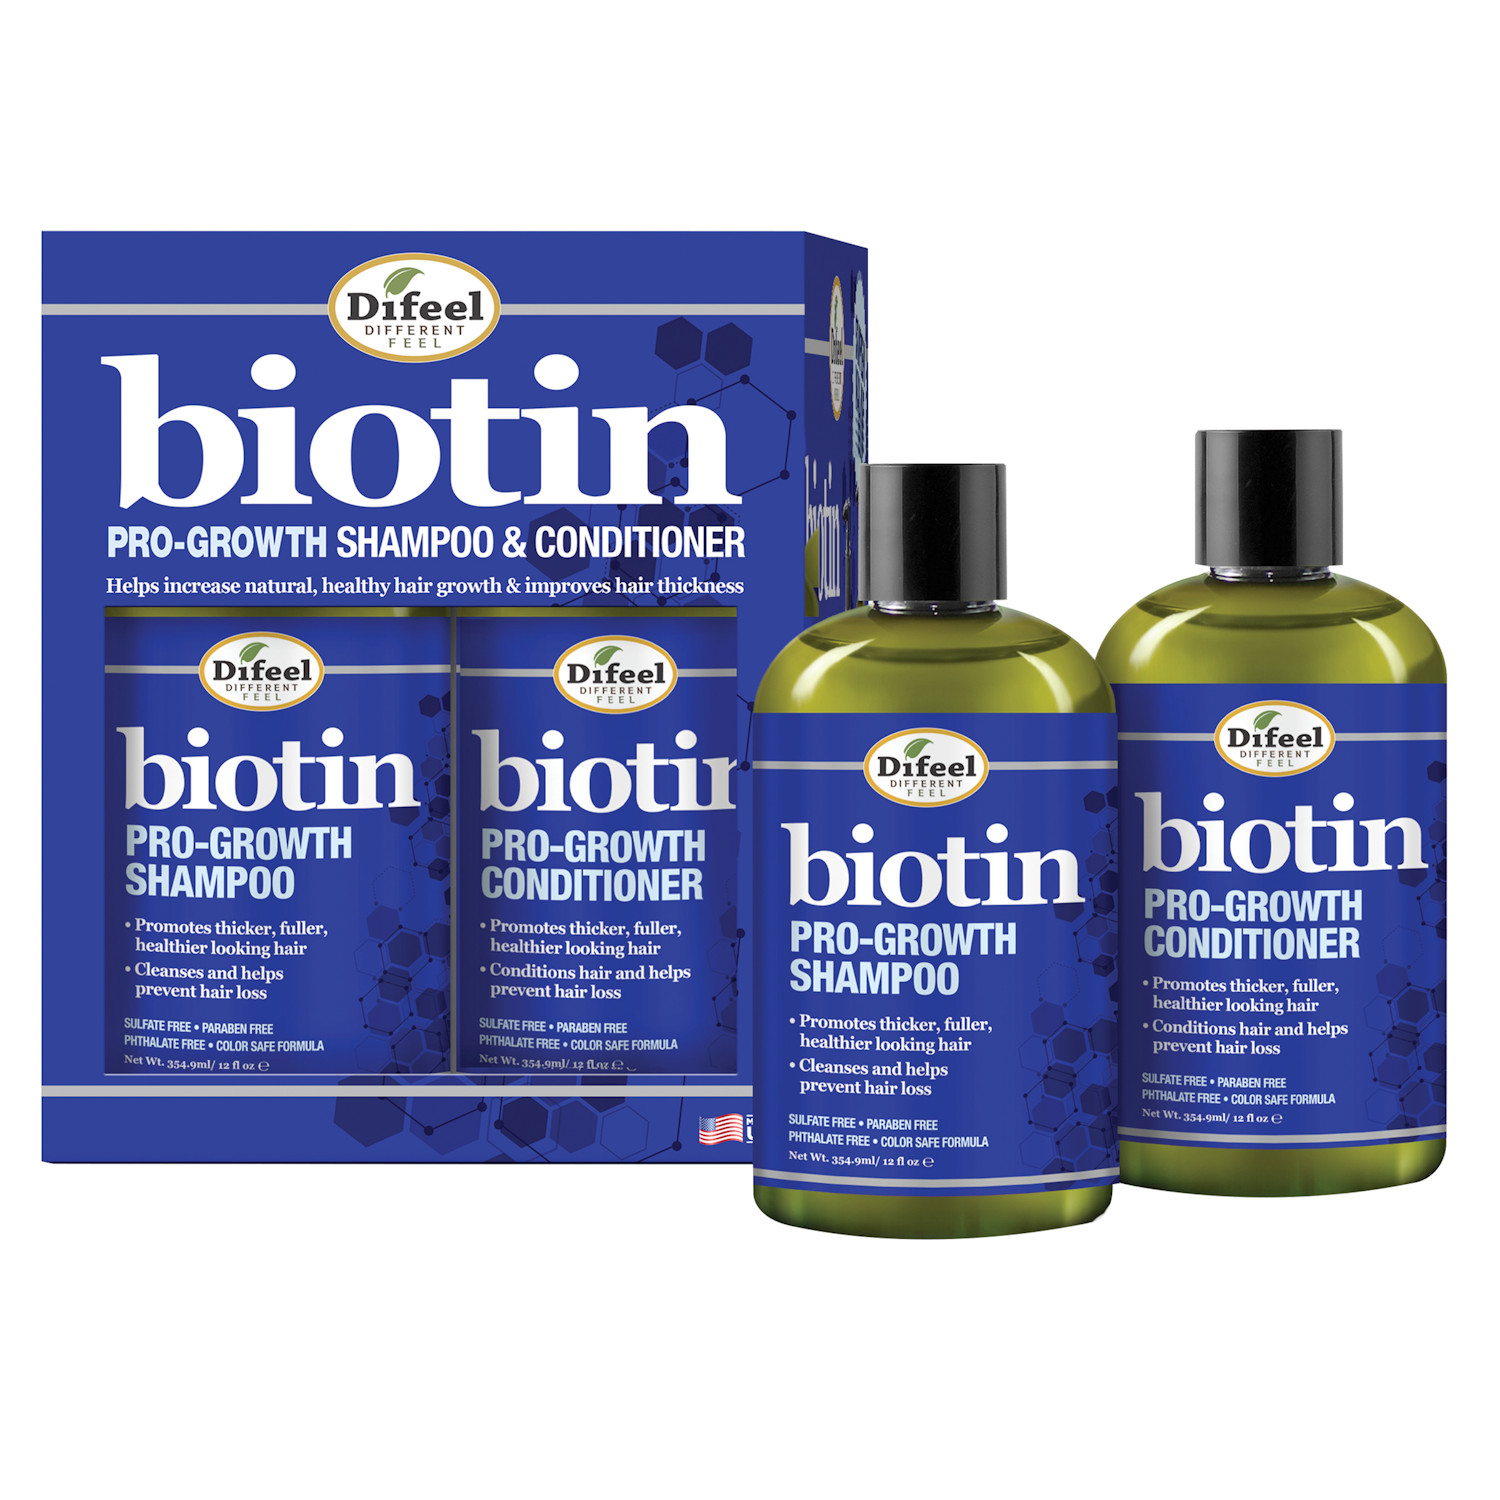 Biotin Pro-Growth Shampoo and Conditioner - 2 Pack | 8 Reviews   Stars | Support Plus | FL8112